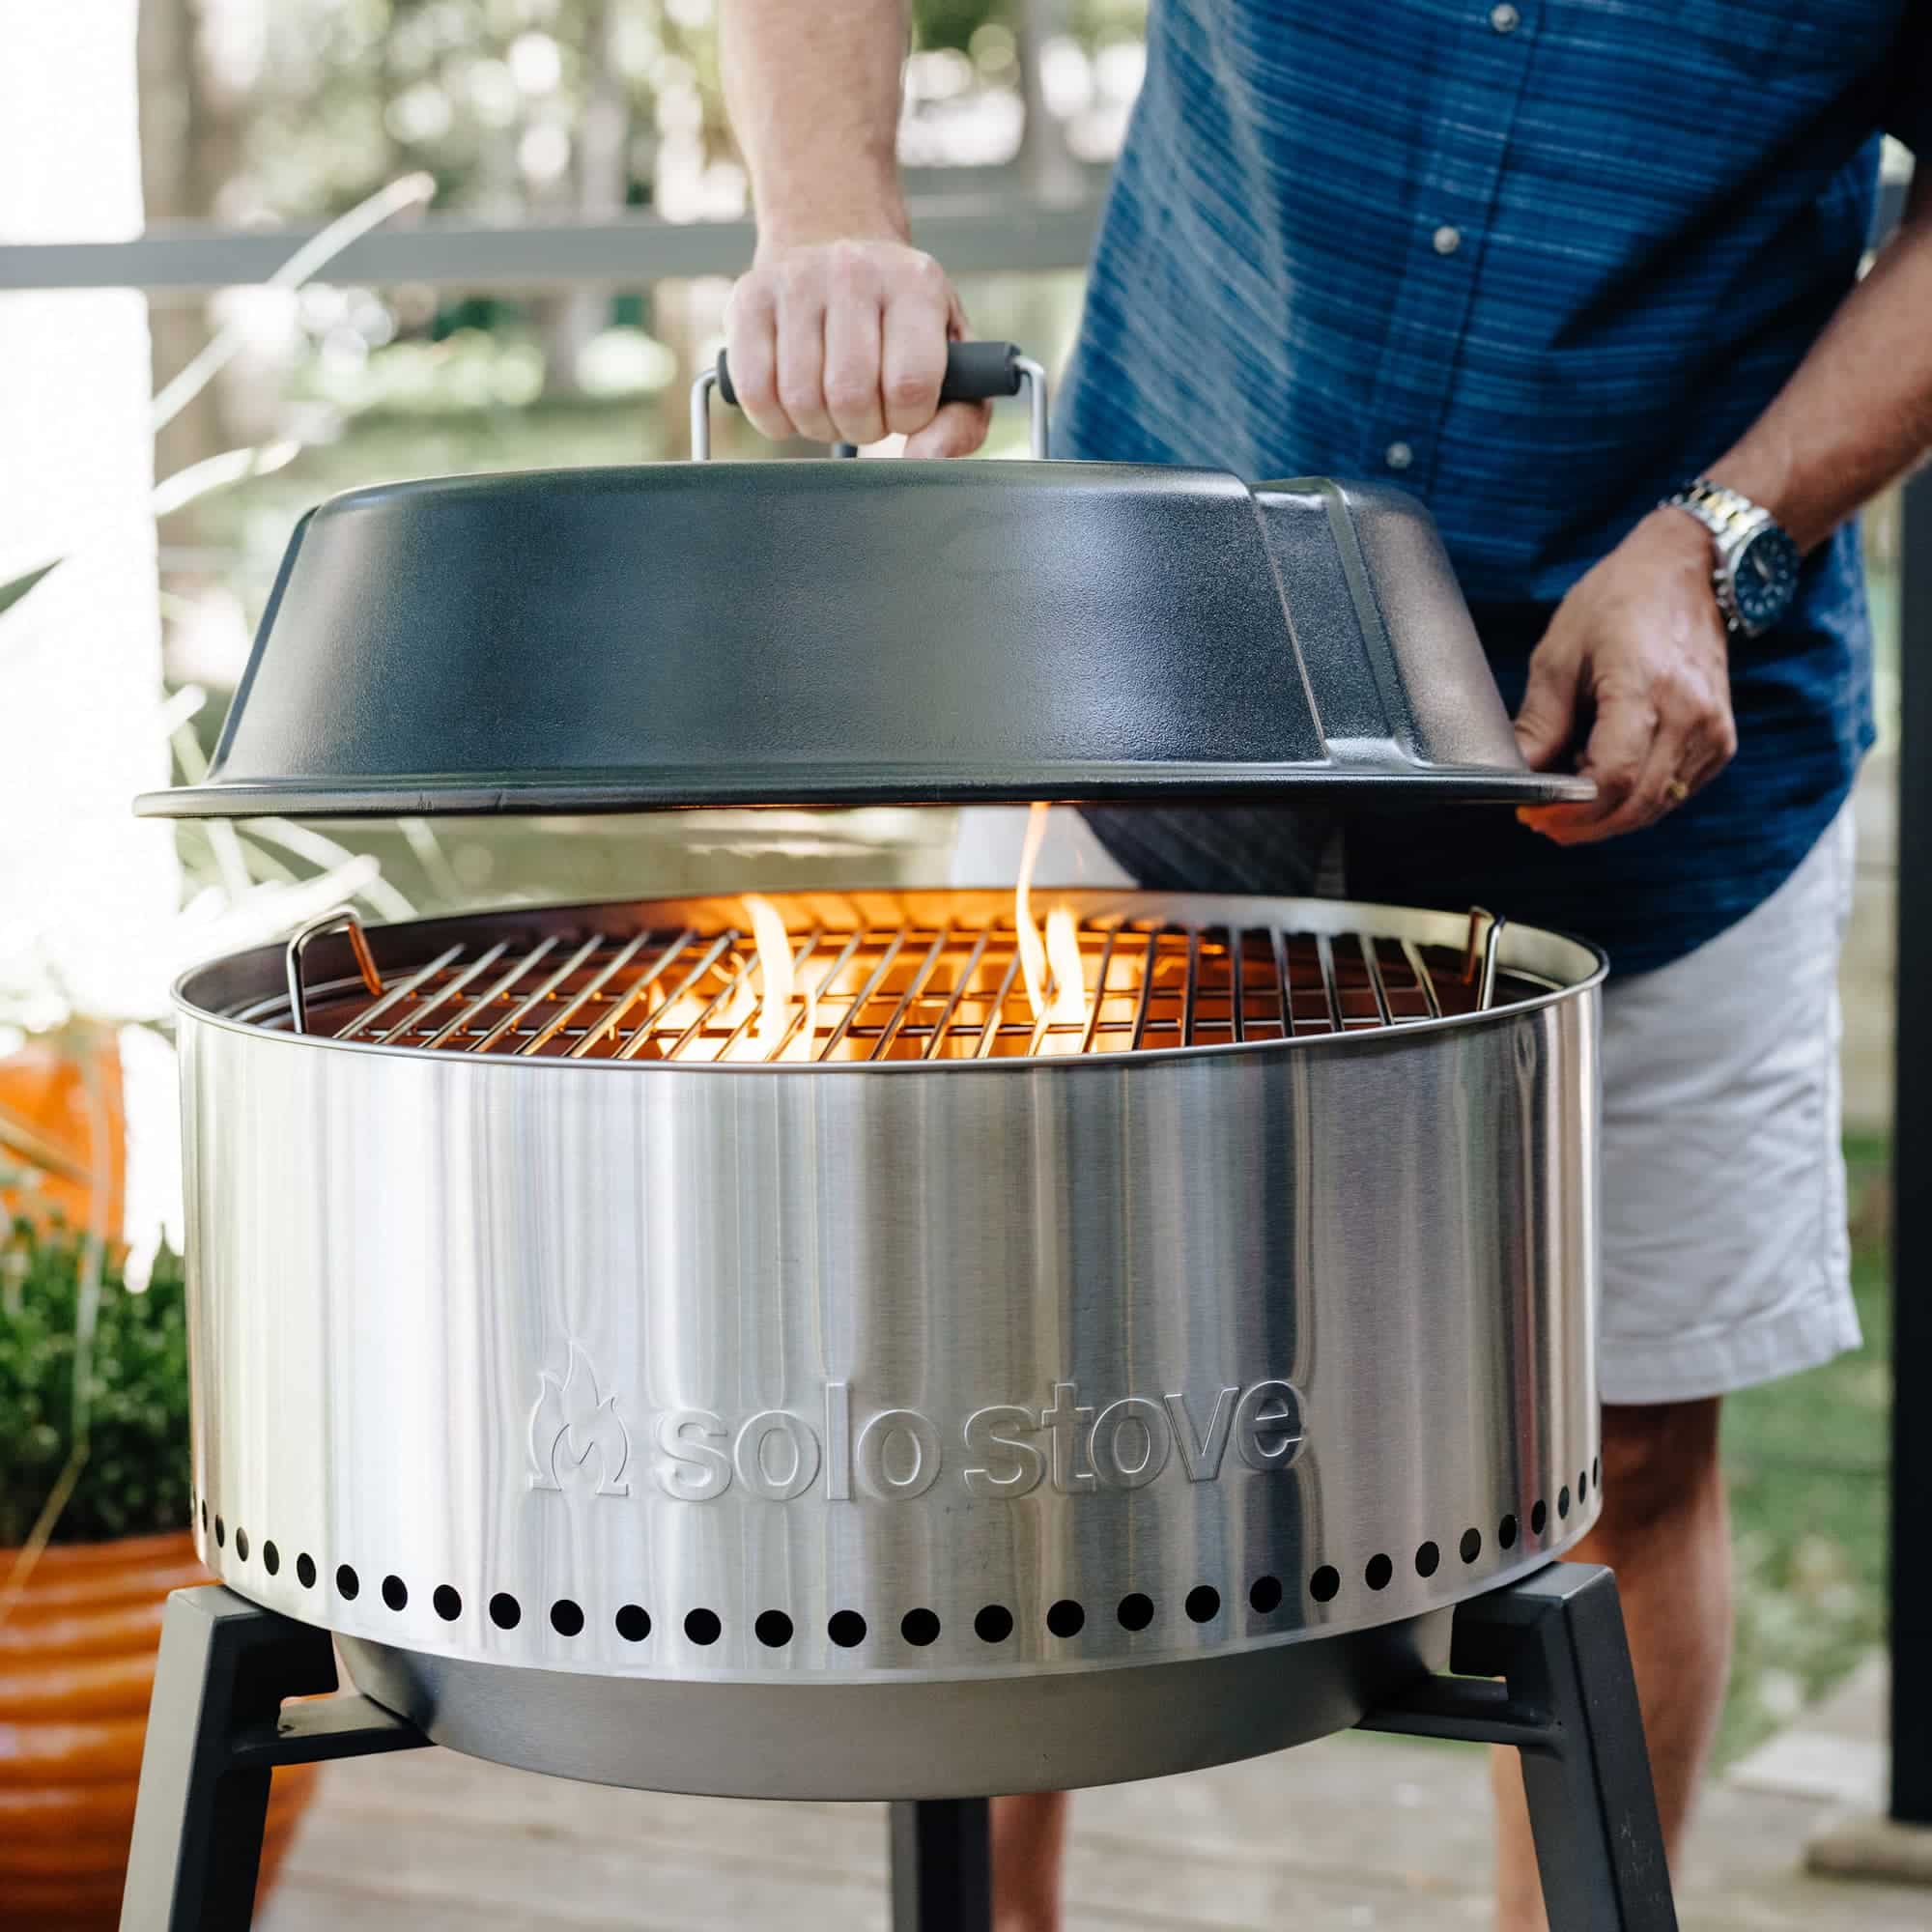 https://www.maisonflair.co.uk/wp-content/uploads/2022/03/Solo-Stove-Grill-In-Use-1.jpg